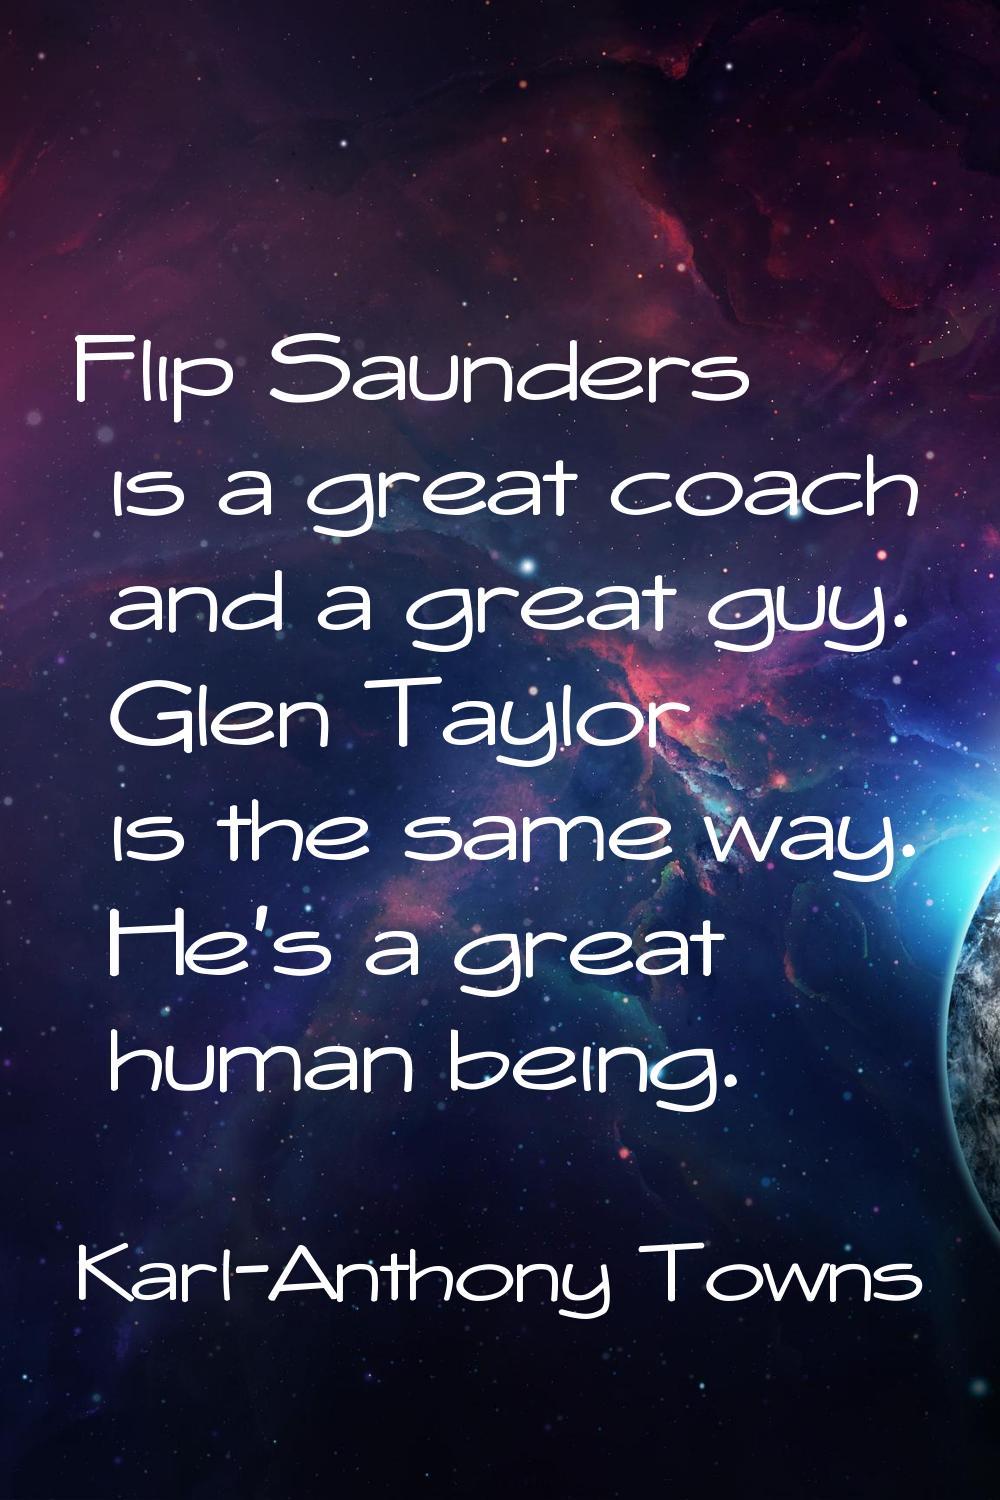 Flip Saunders is a great coach and a great guy. Glen Taylor is the same way. He's a great human bei